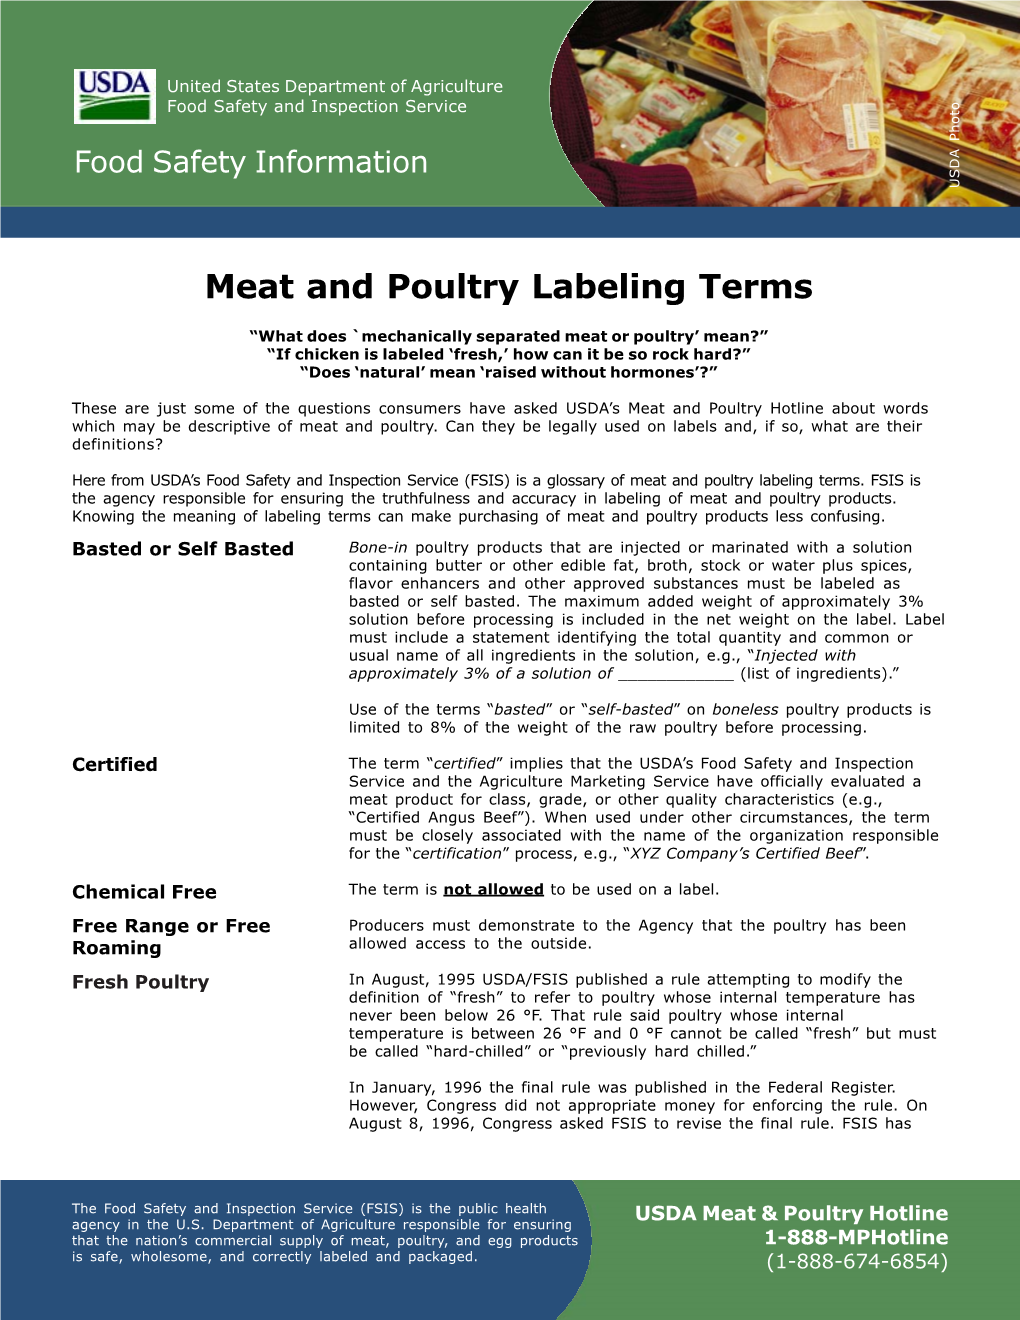 Meat and Poultry Labeling Terms